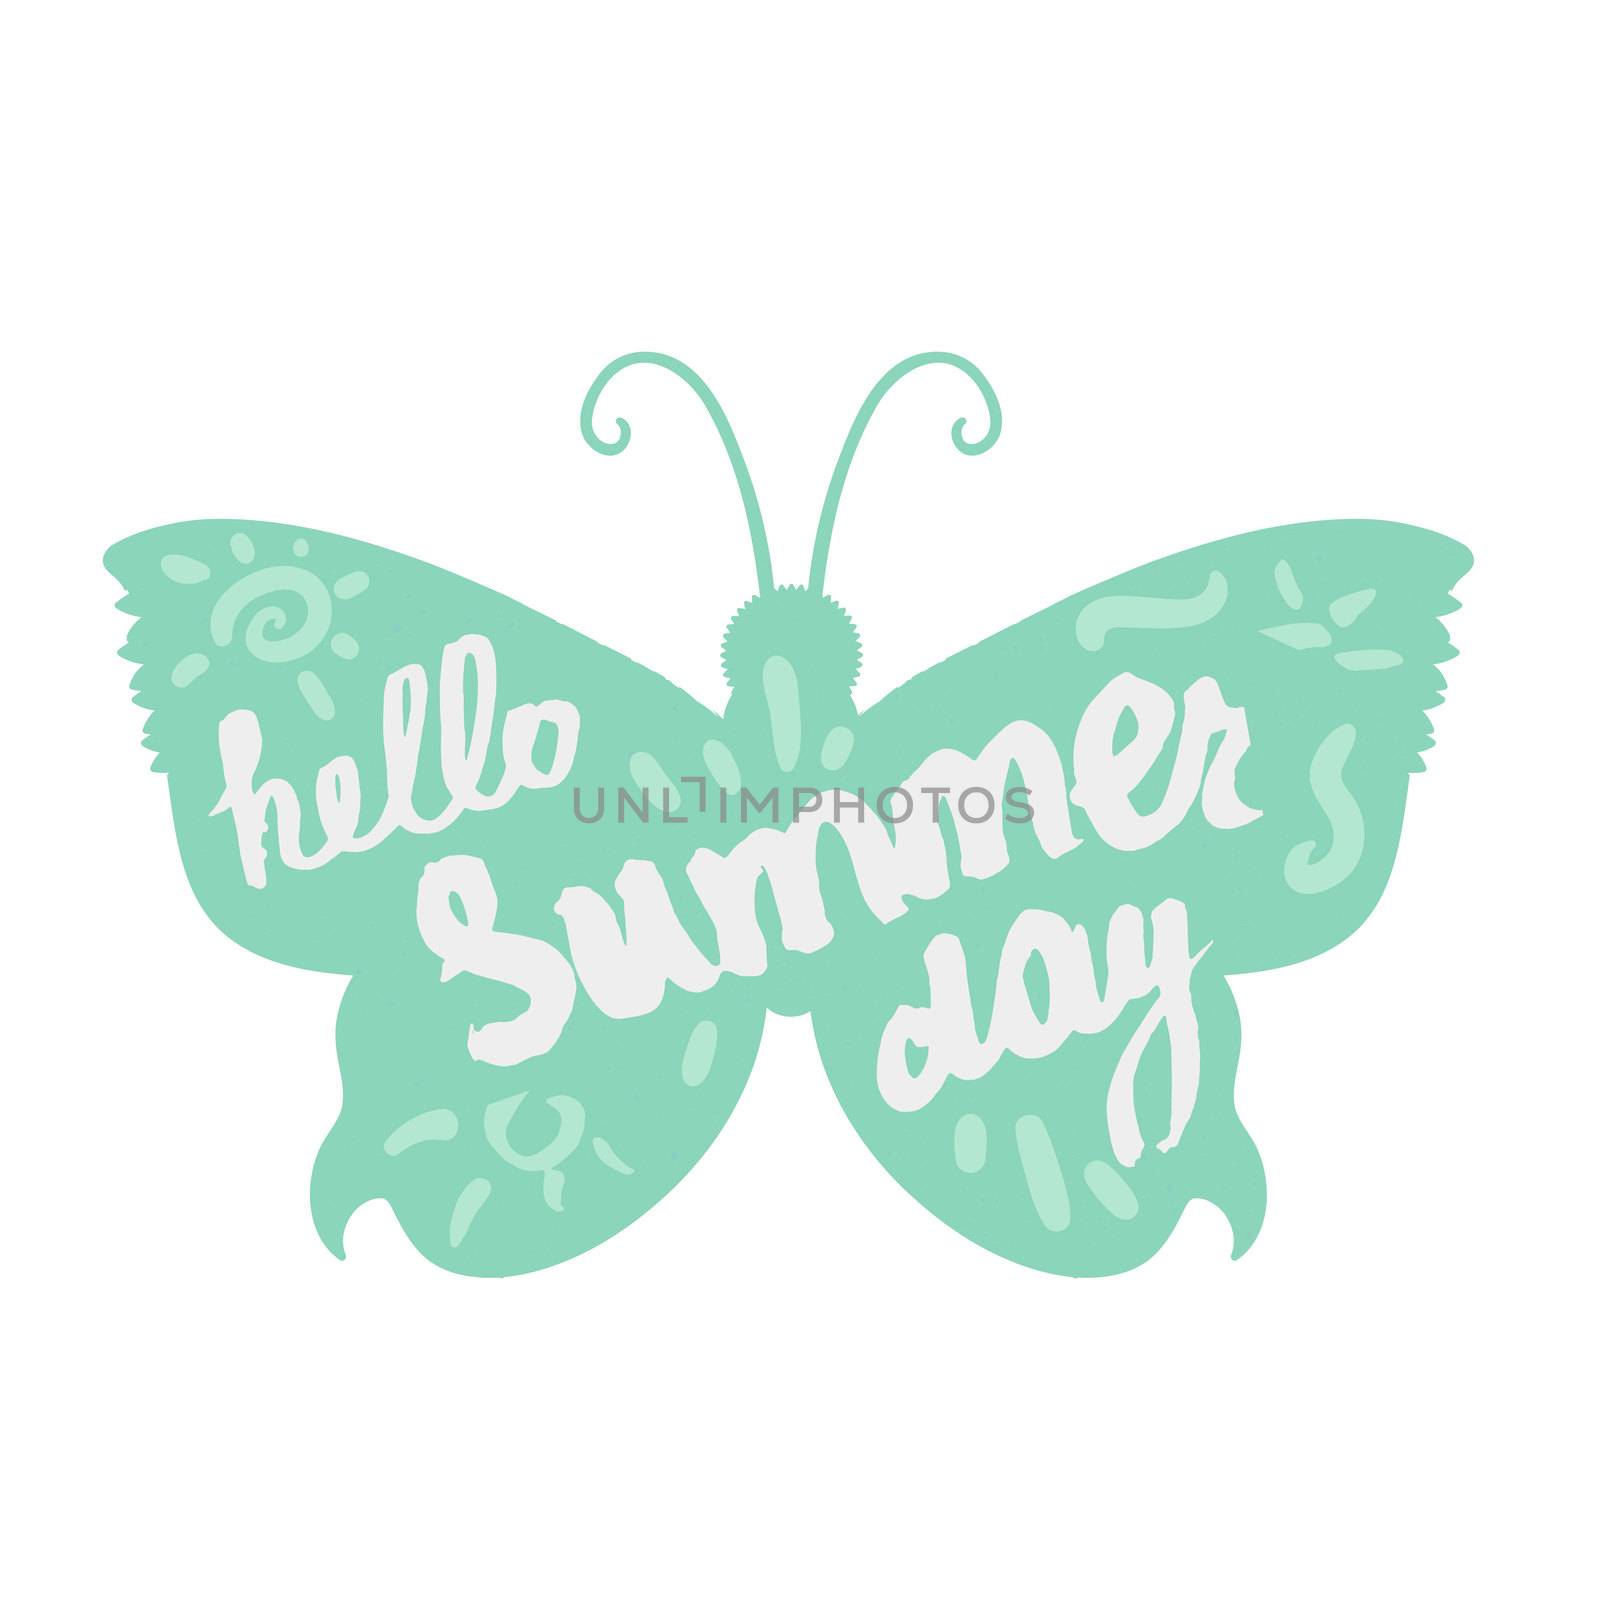 Hello Summer Day Lettering by brush. Typographic vacation and travel vintage poster with bright butterfly. Vector